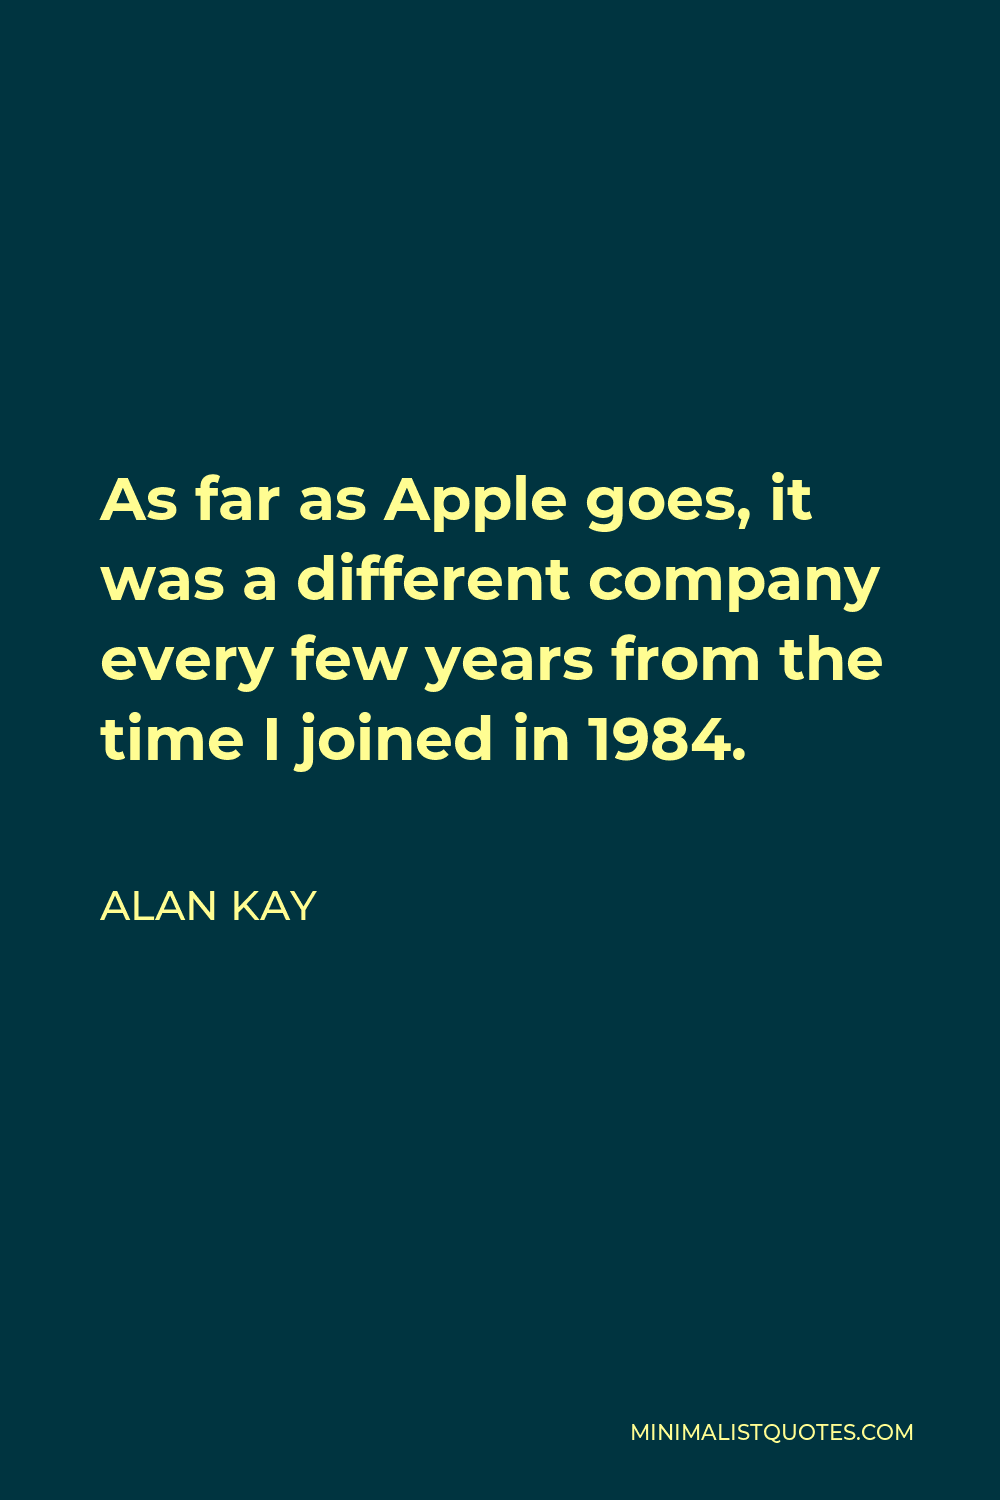 Alan Kay Quote - As far as Apple goes, it was a different company every few years from the time I joined in 1984.